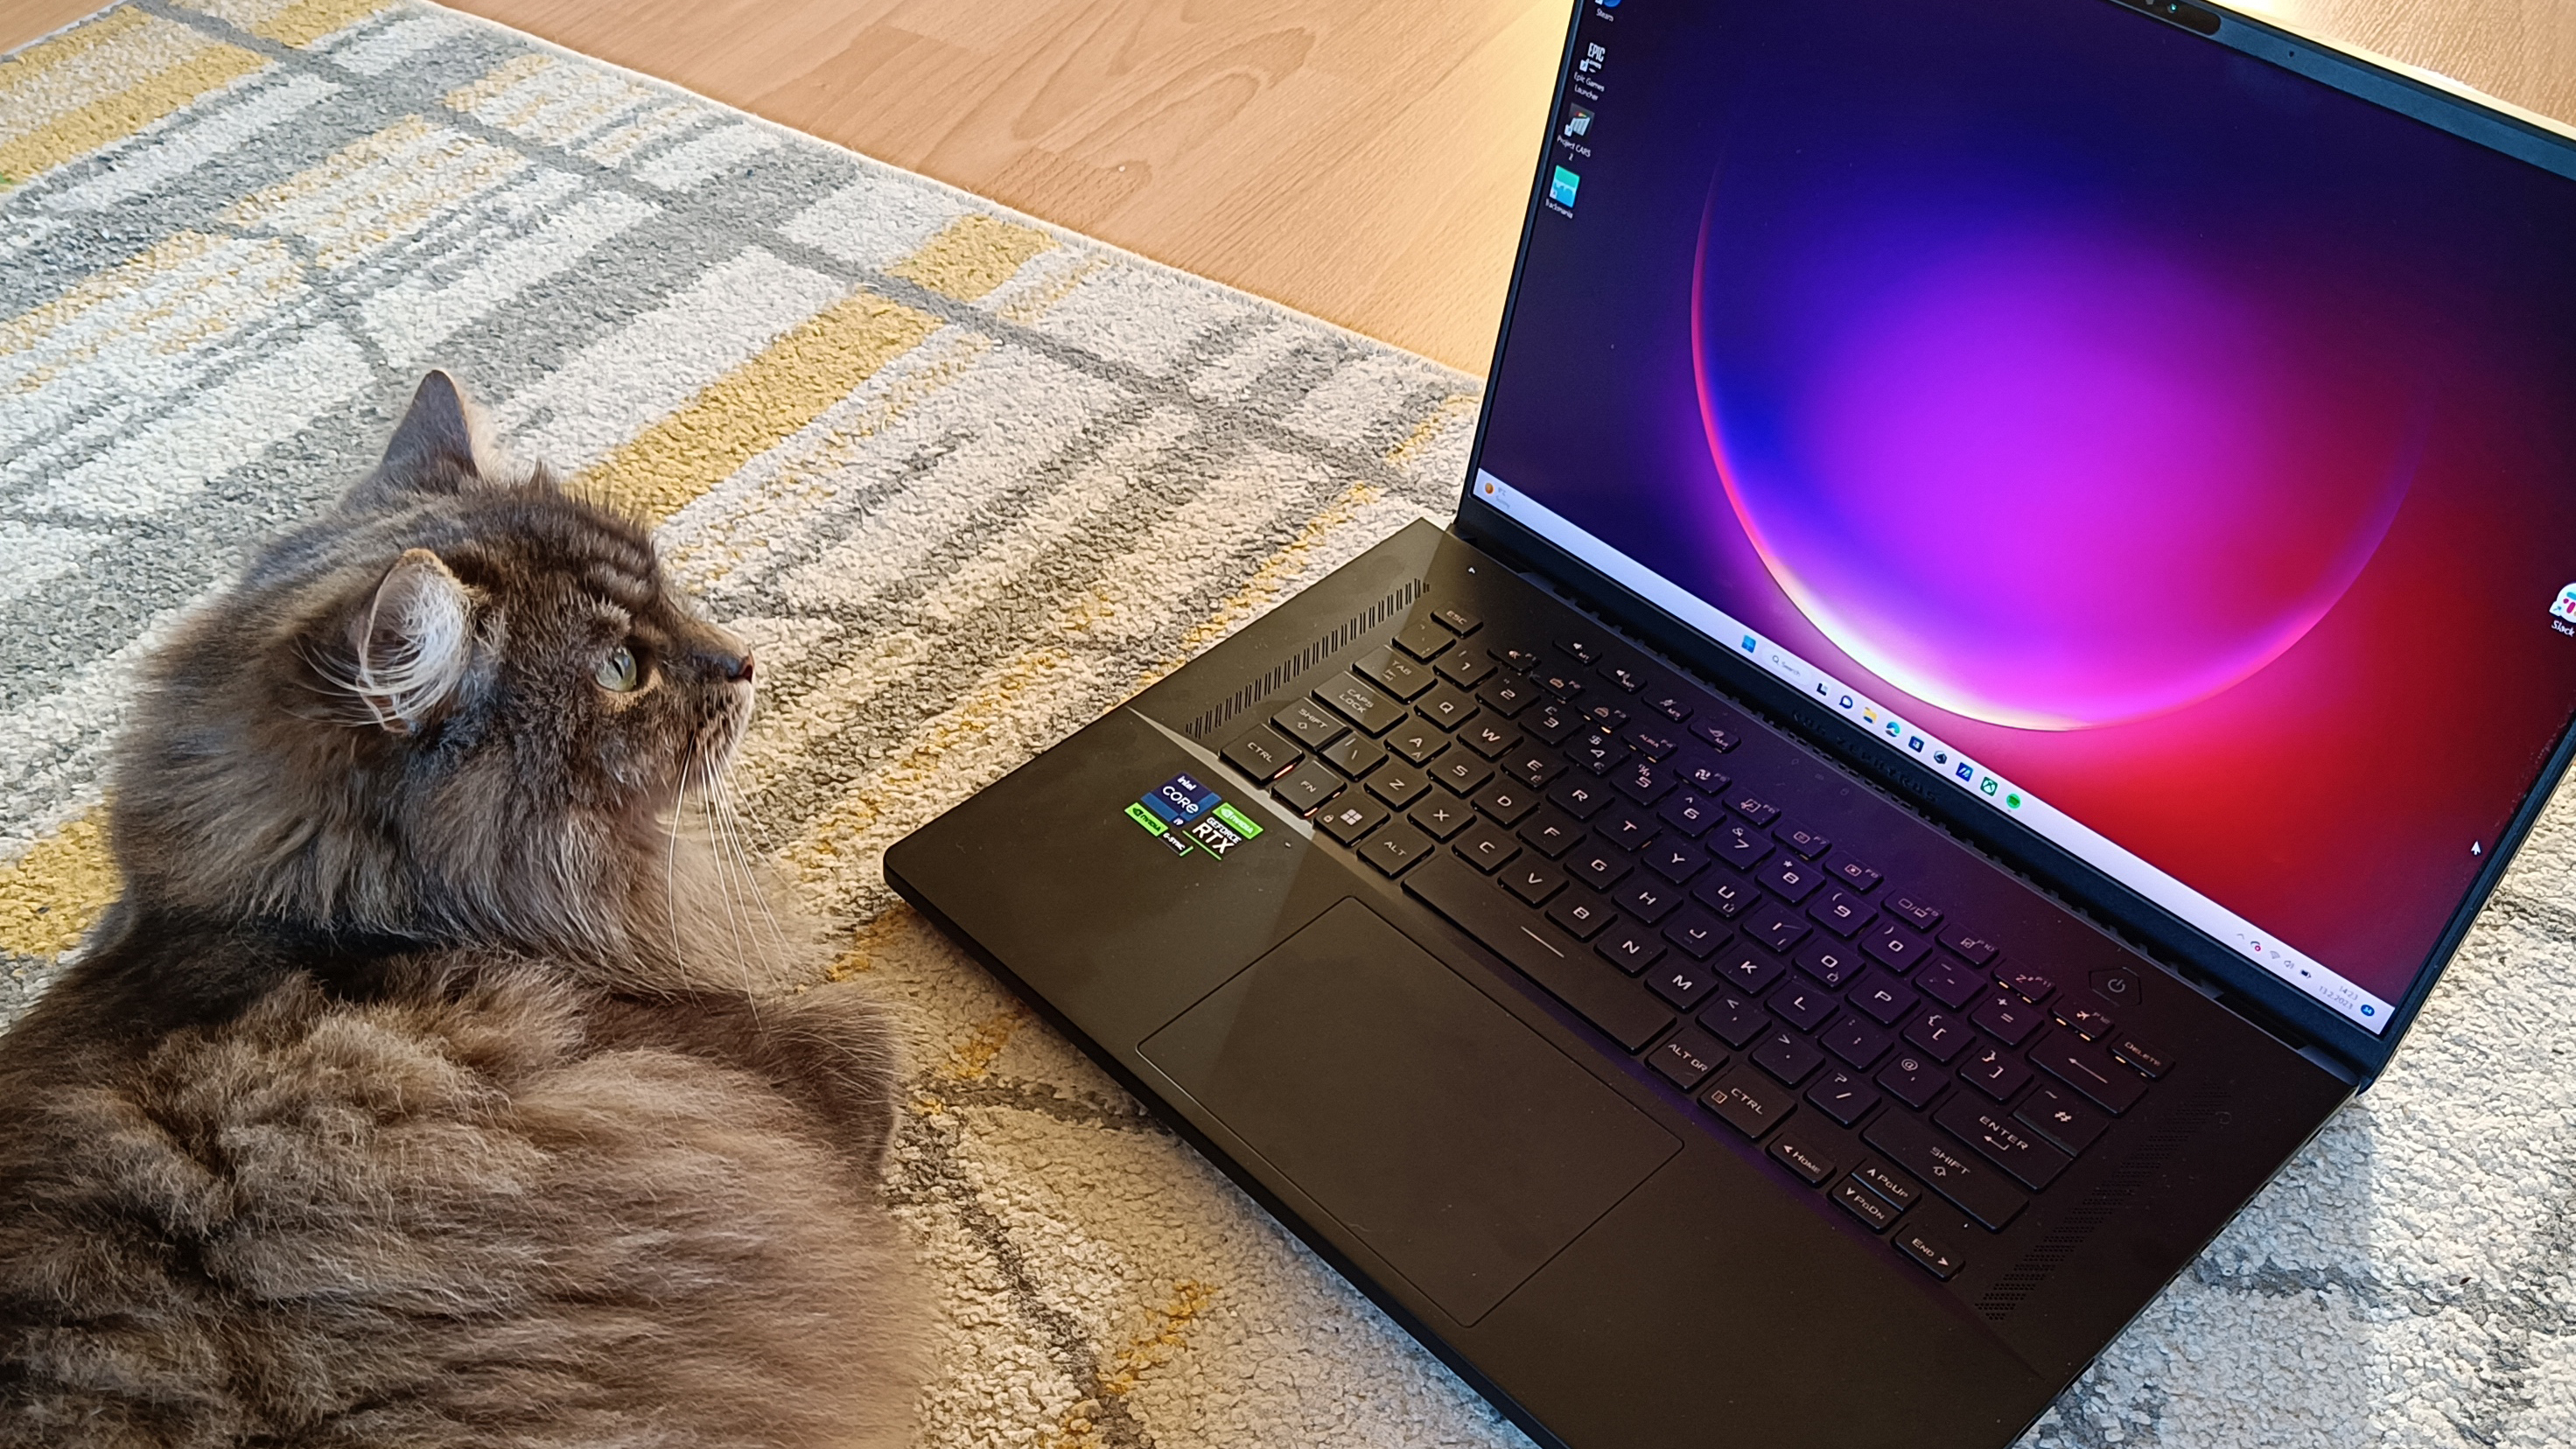 An ASUS ROG Zephyrus M16 gaming laptop sitting on a rug in front of a grey lying cat